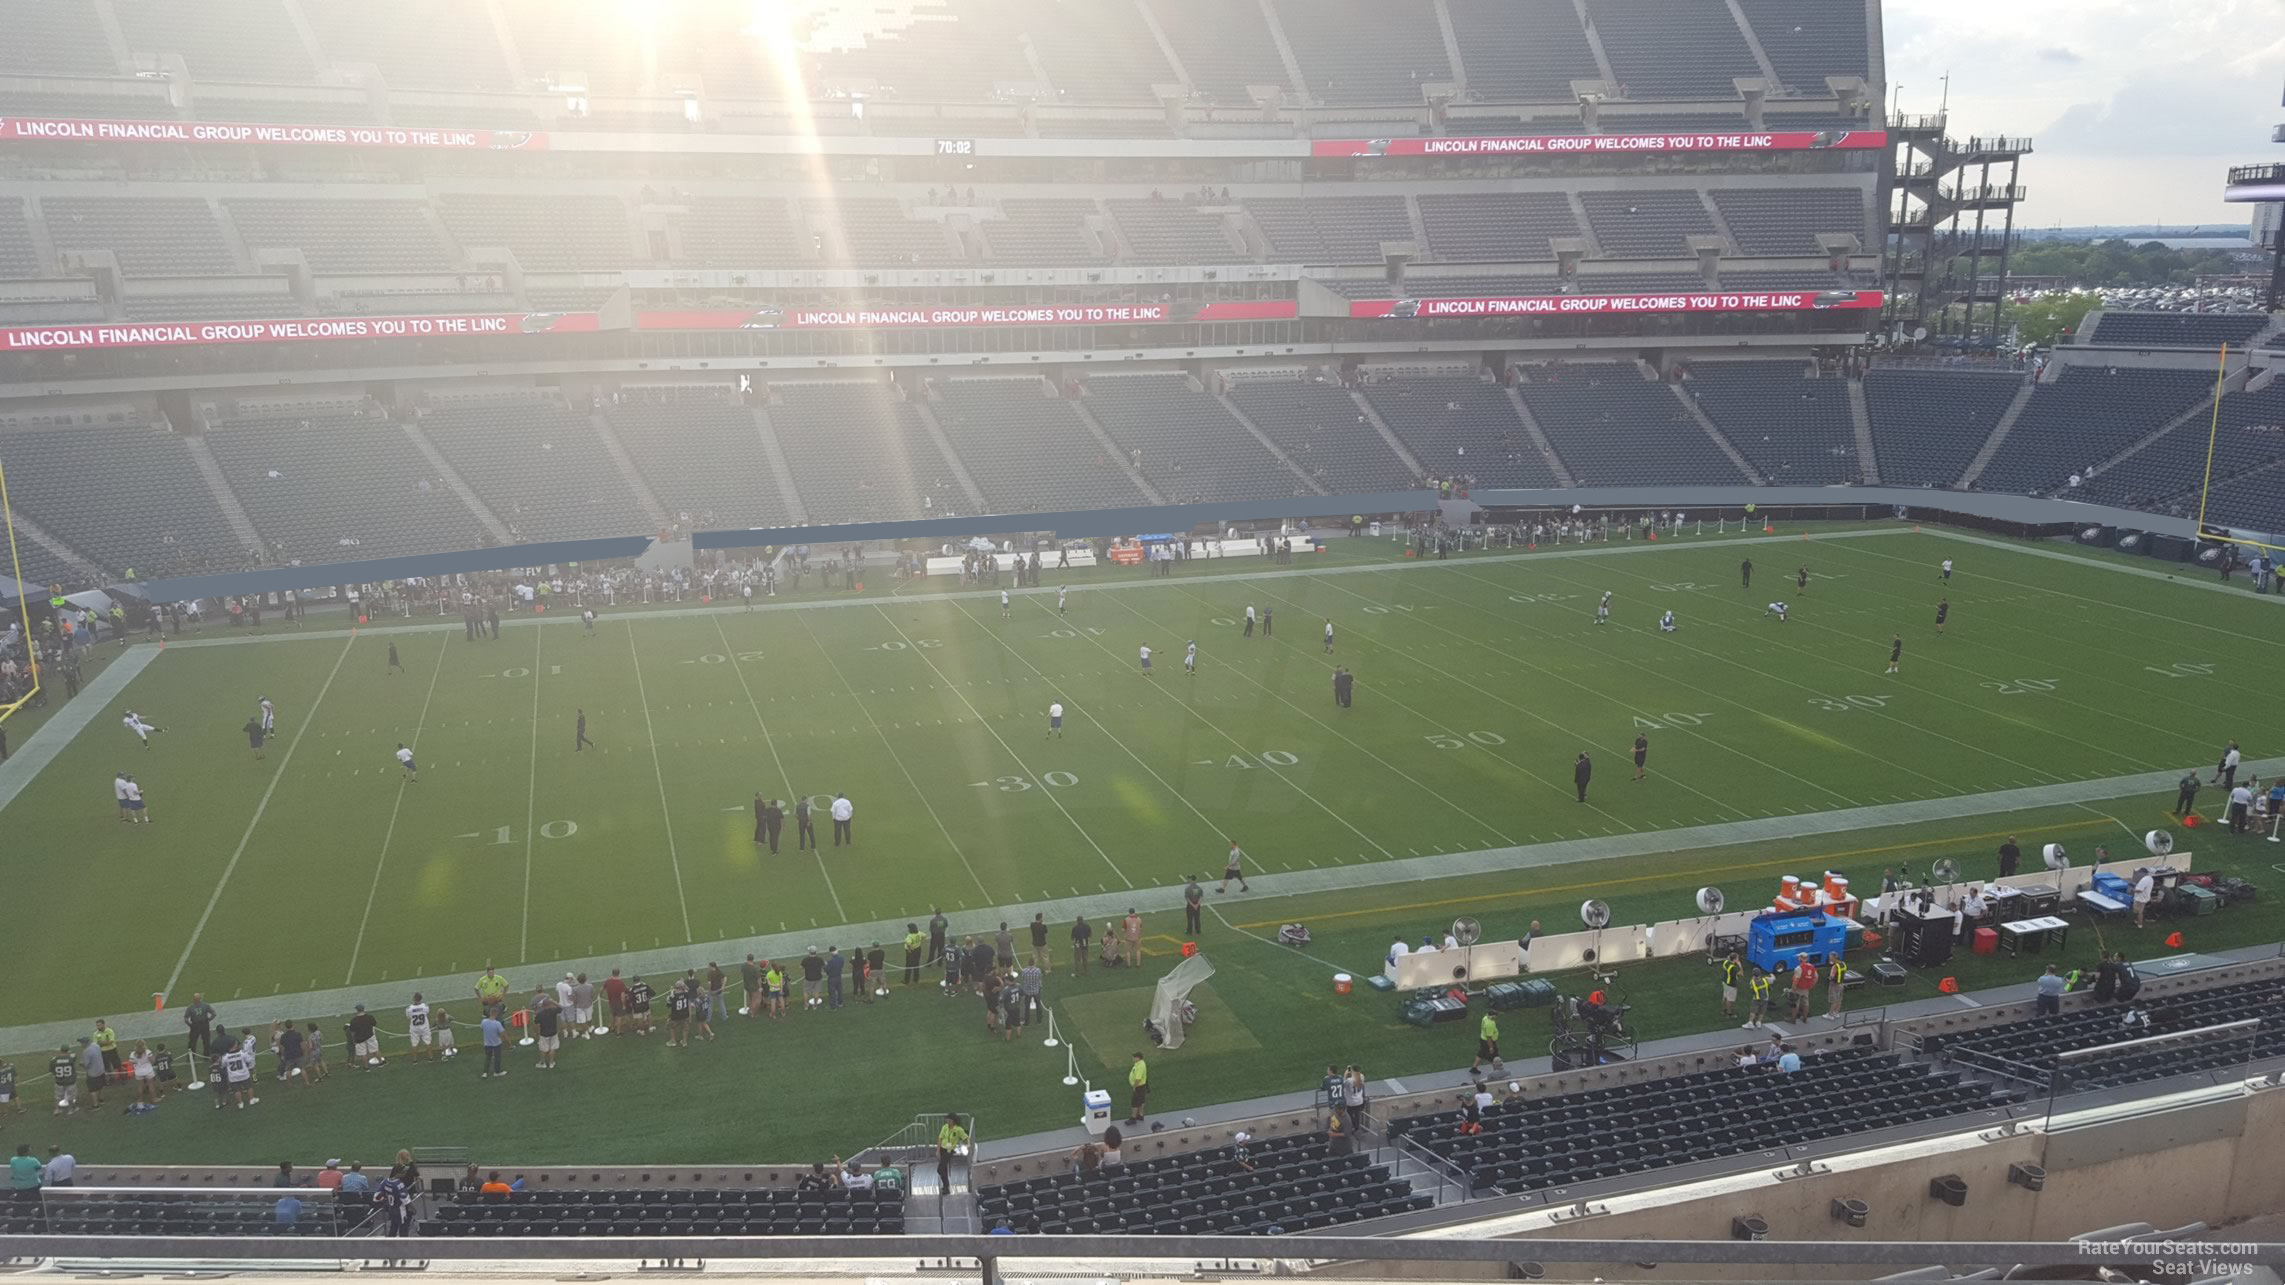 section c19, row 7 seat view  for football - lincoln financial field